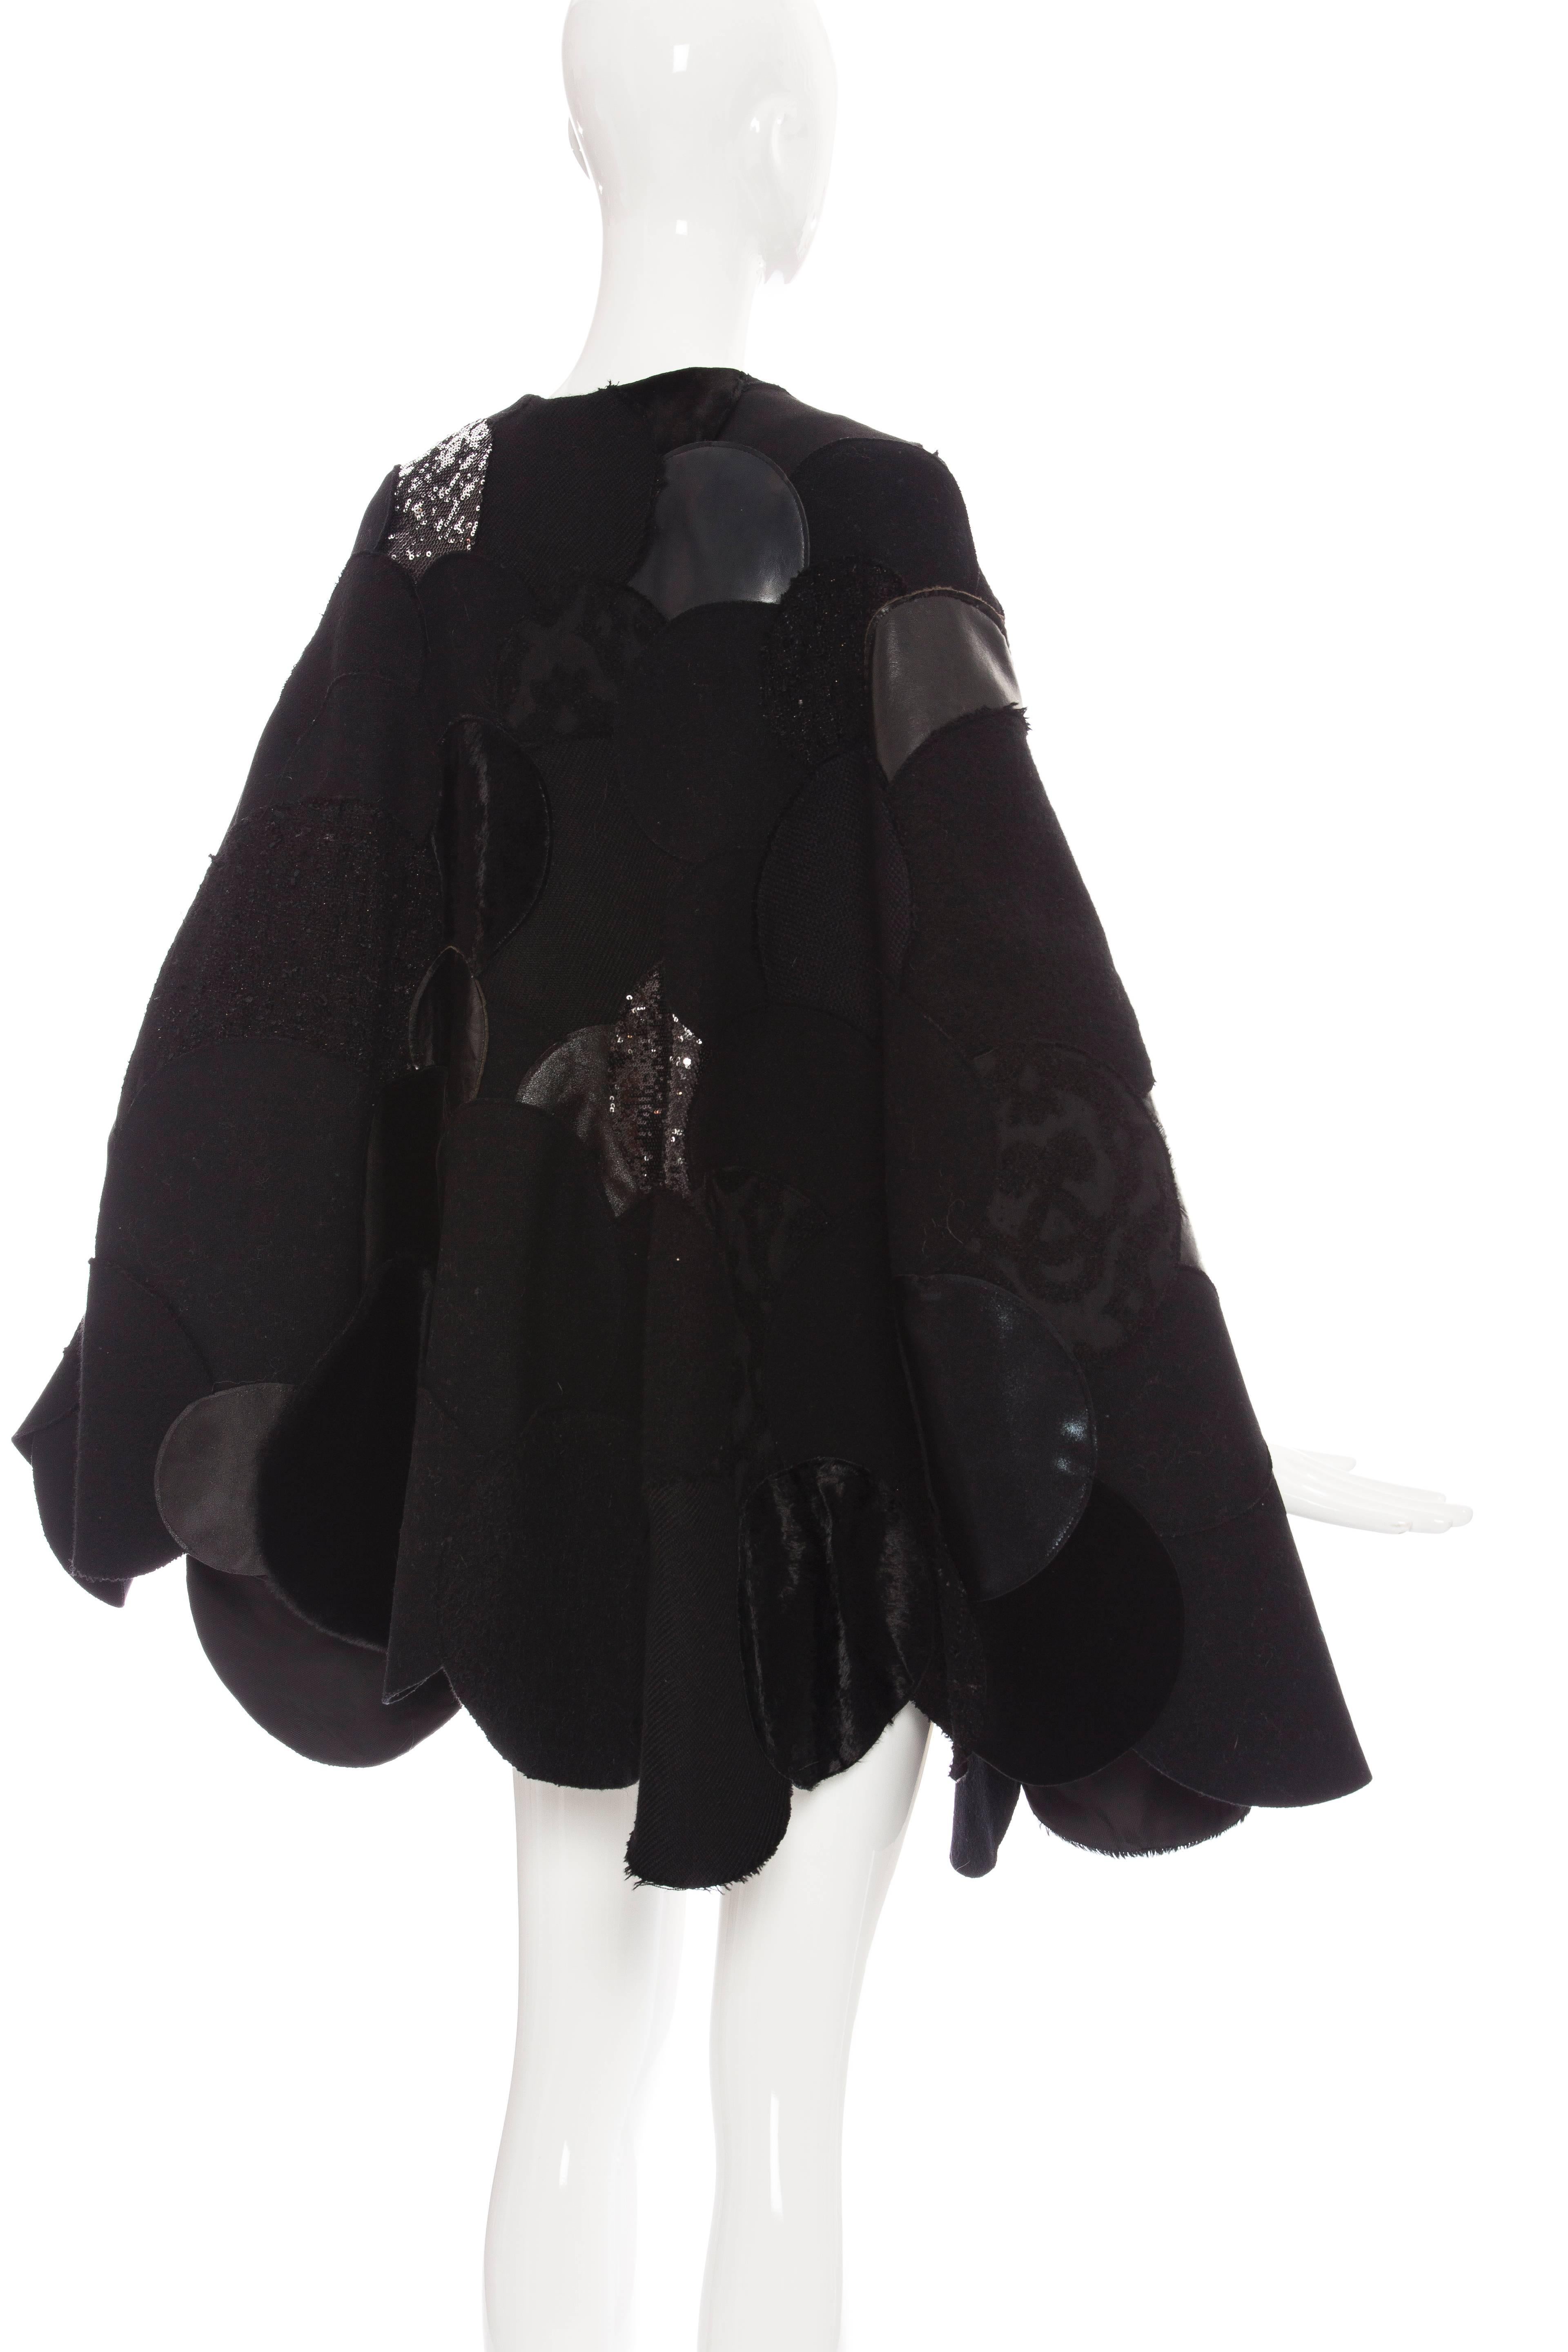 Junya Watanabe Comme des Garcons Black Wool Sequin Leather Cape, Fall 2014 3